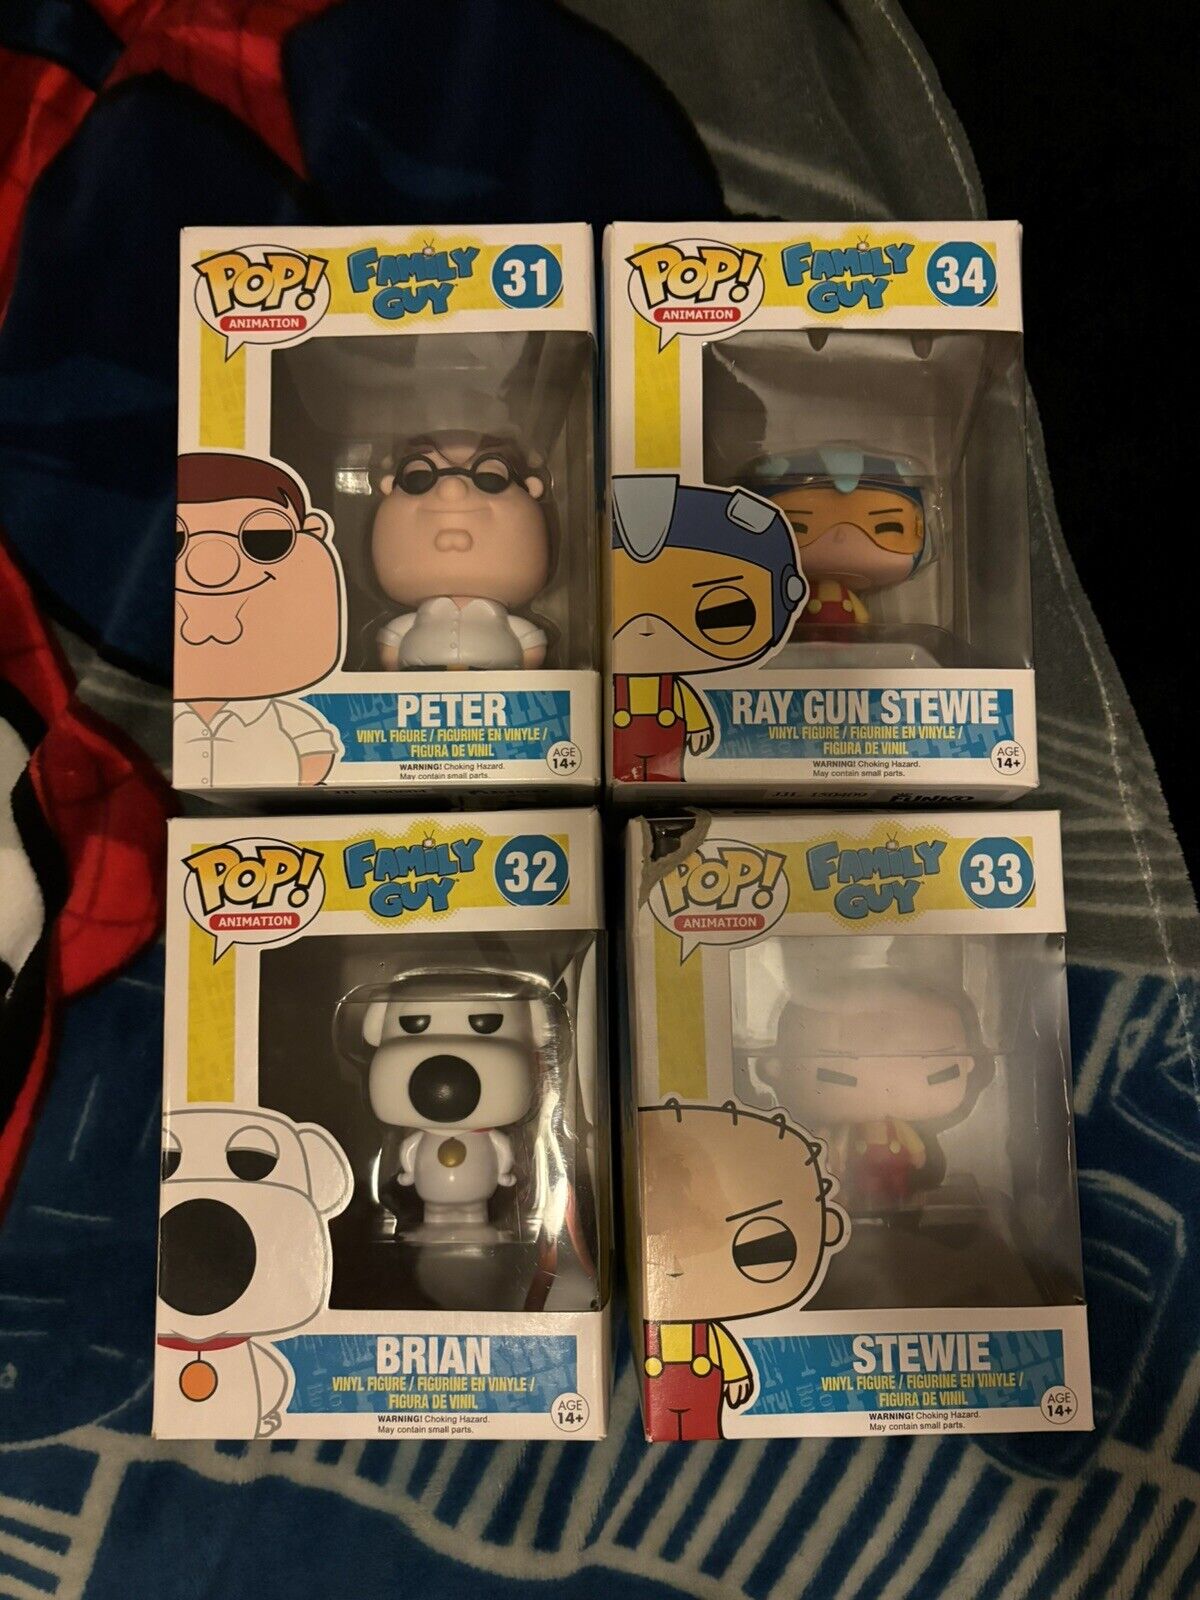 4 Family Guy Funko POPS Lot Defects On 2 Boxes Other than that Amazing Set